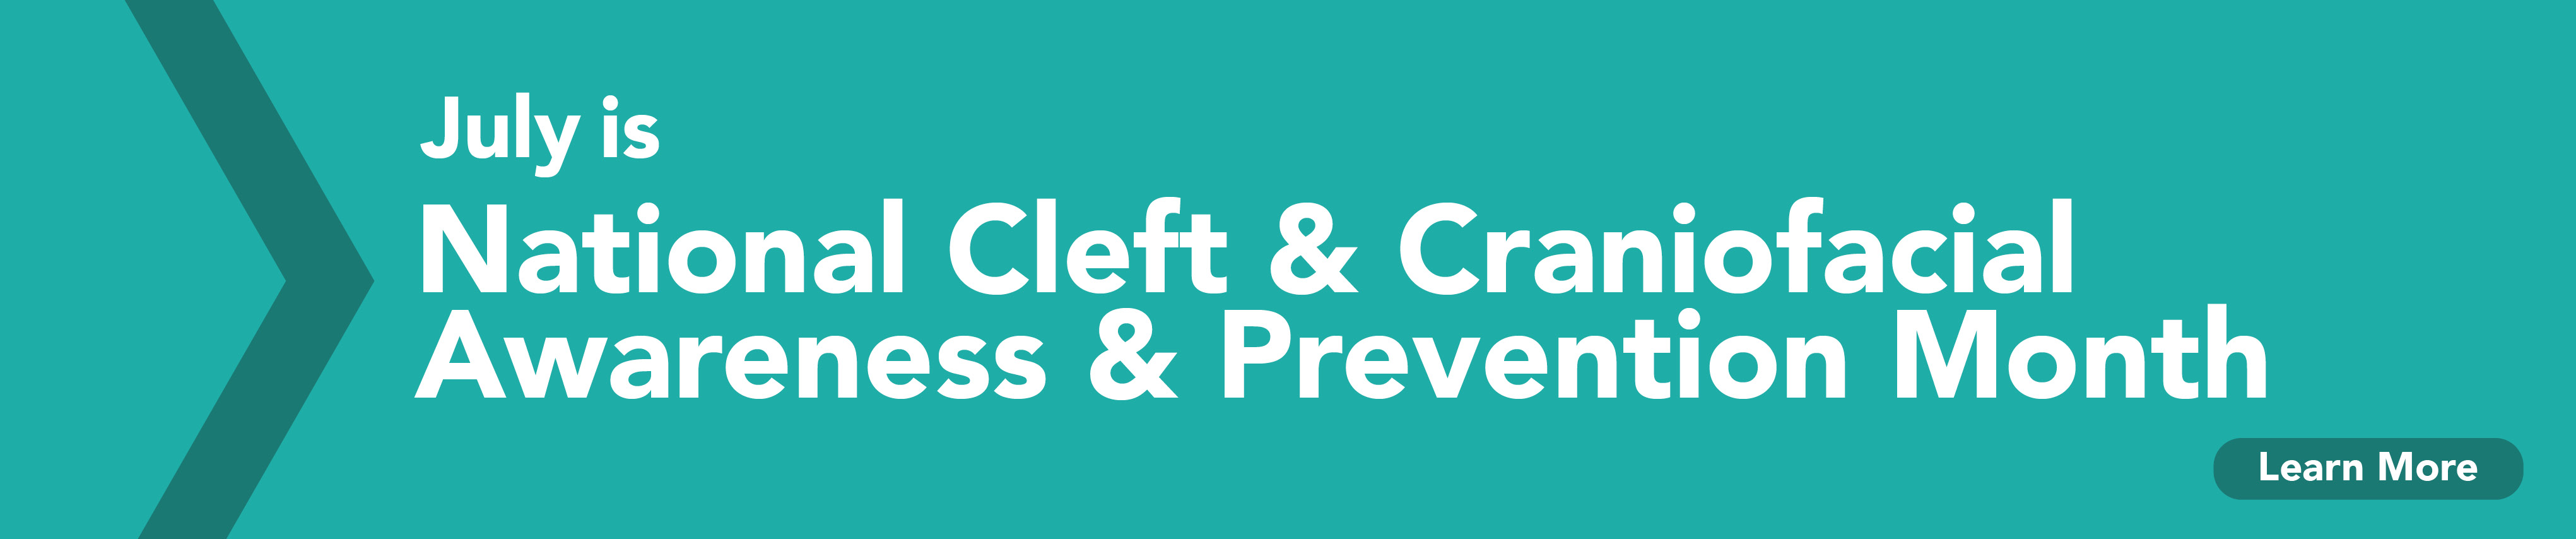 July is National Cleft & Craniofacial Awareness & Prevention Month